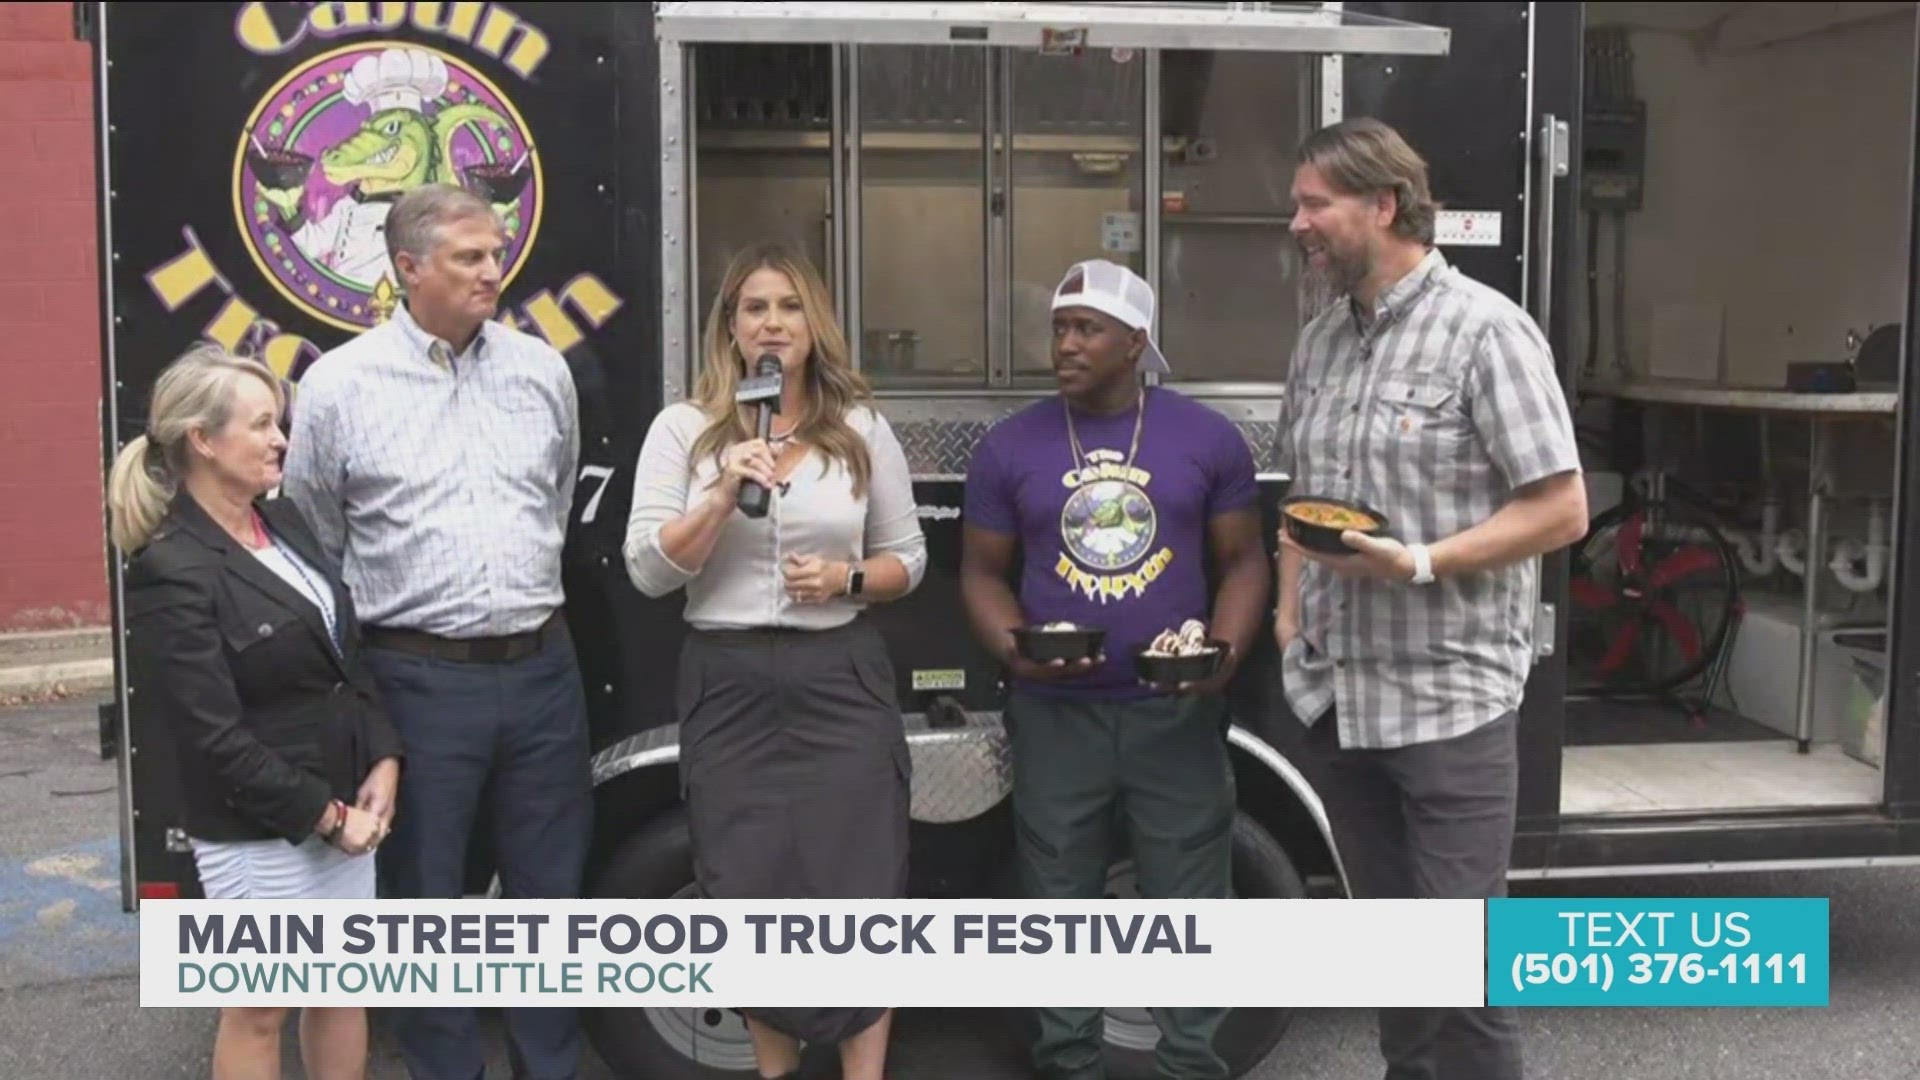 Cajun Trouxth is one of the many food trucks at this year's Main Street Food Truck Festival. Co-chairs Brent and Mollie Birch share the mission of this event.